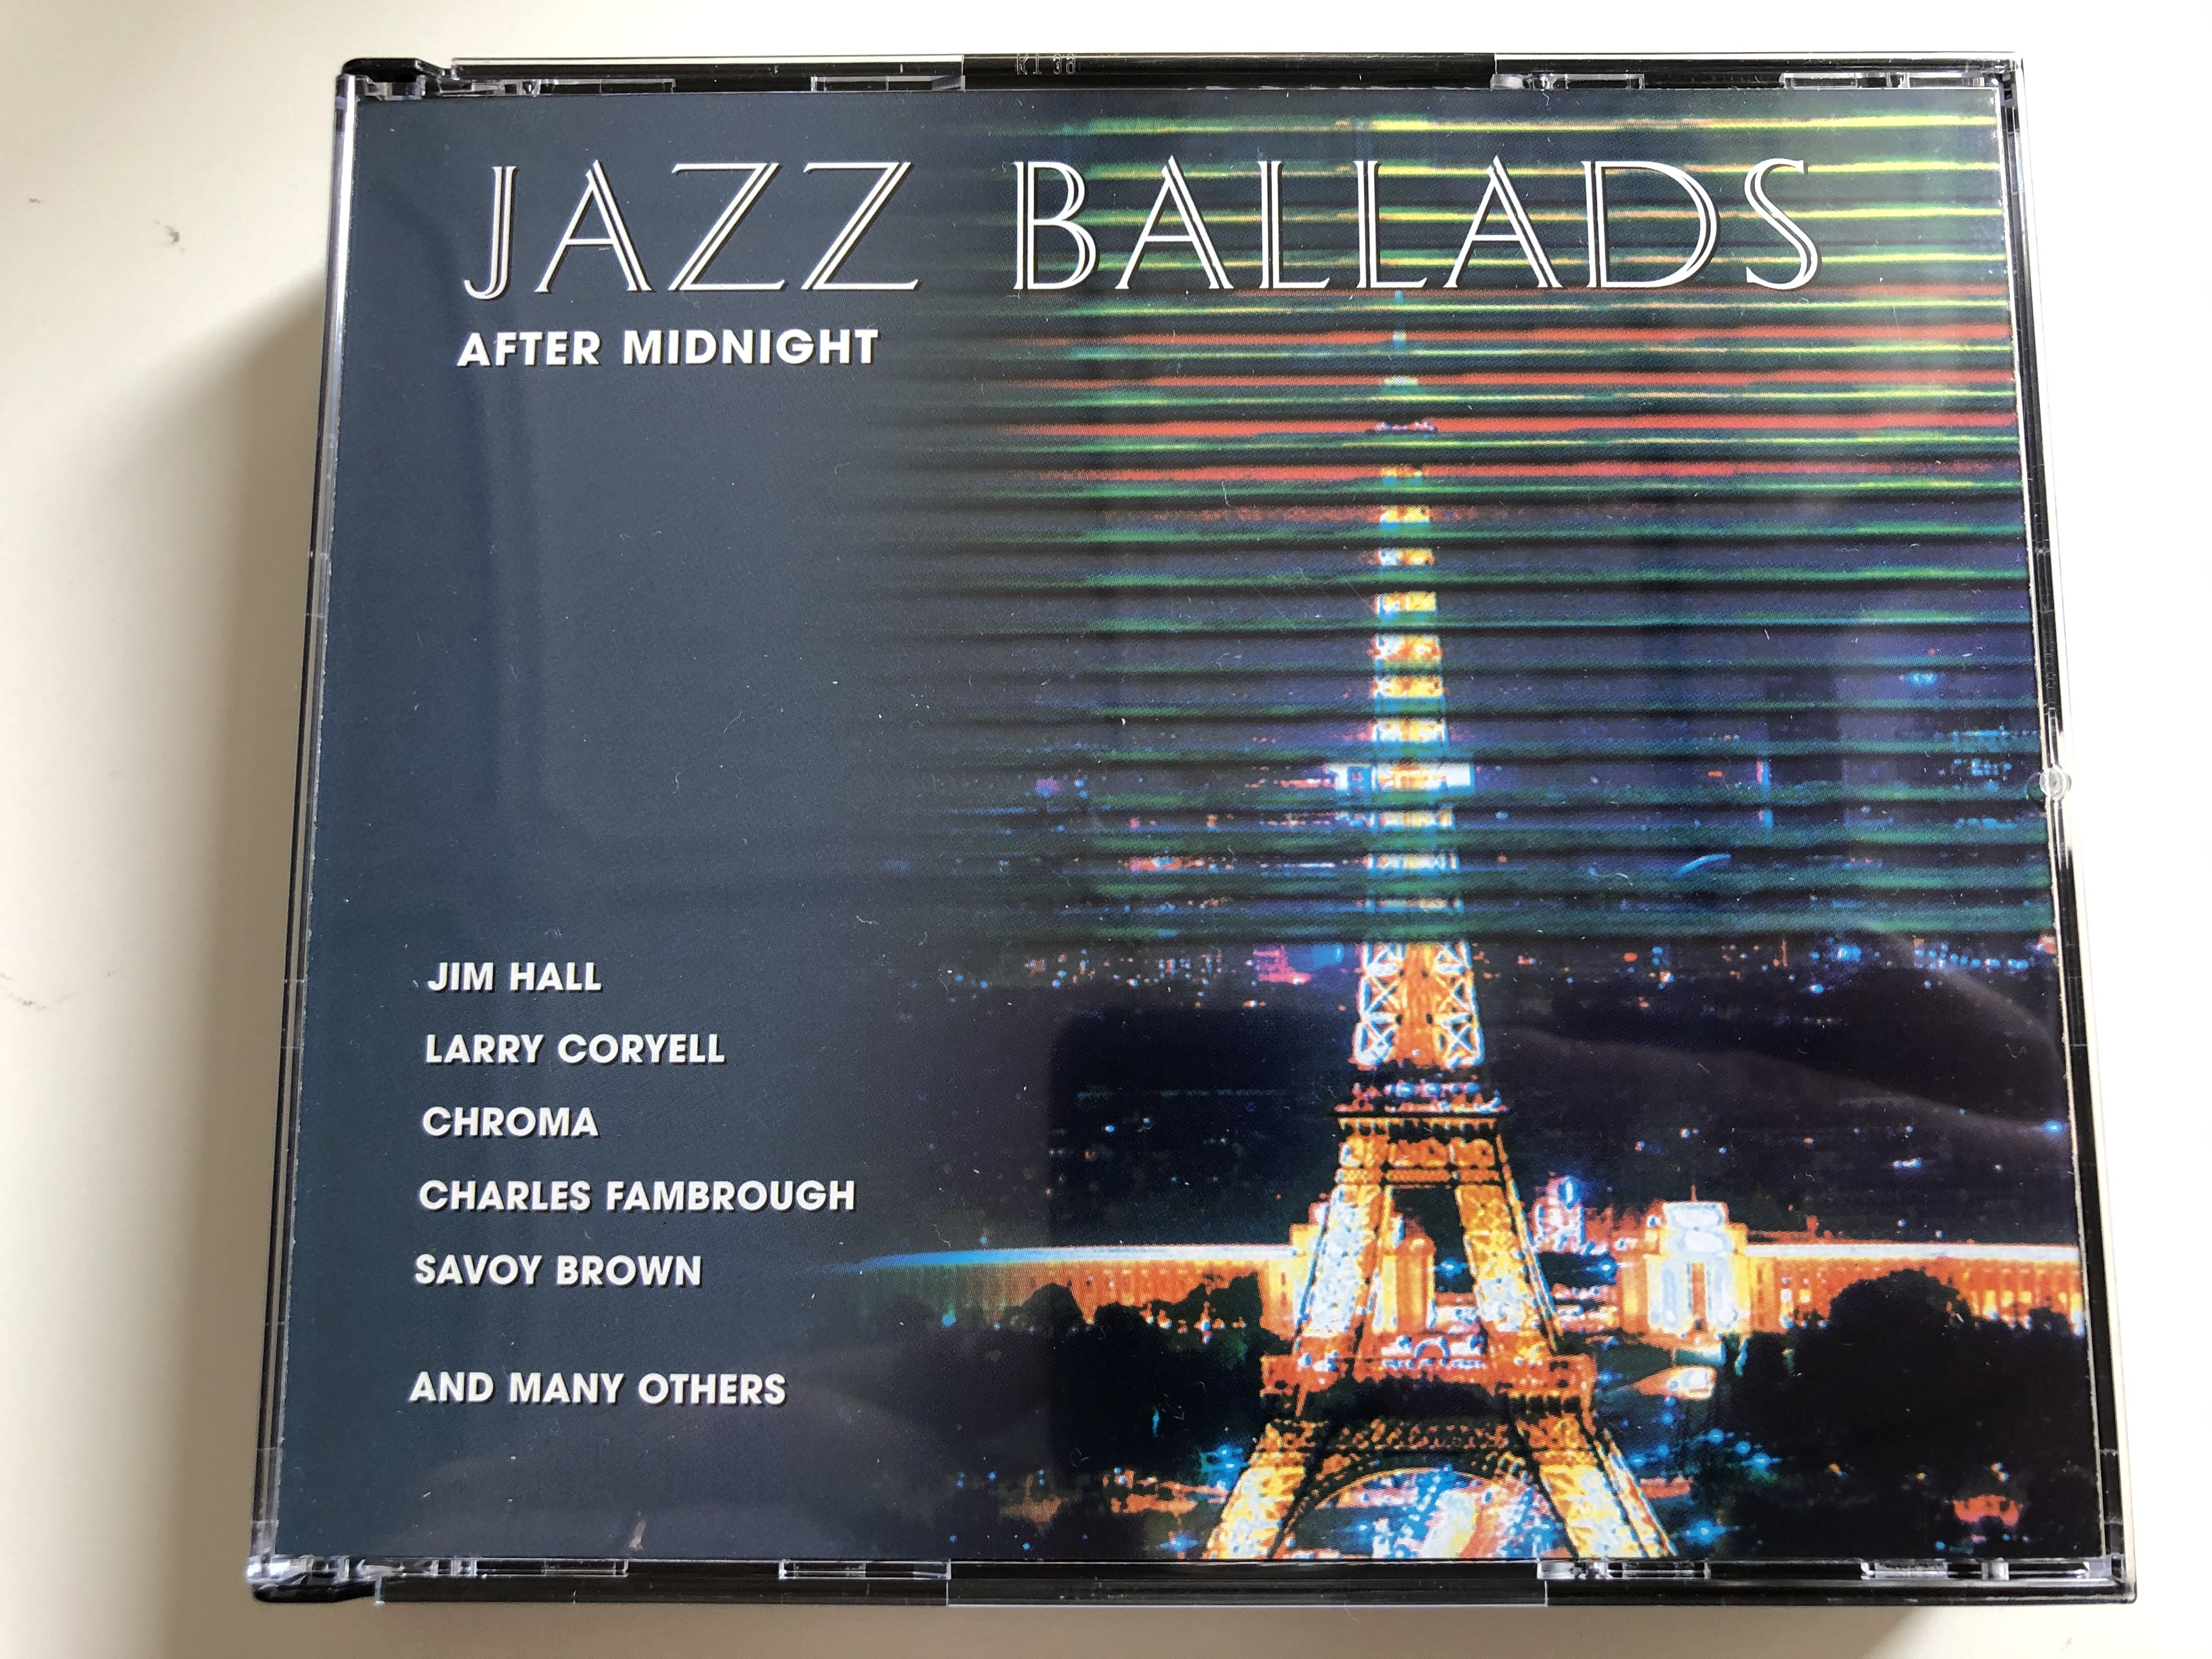 jazz-ballads-after-midnight-jim-hall-larry-coryell-chroma-charles-fambrough-savoy-brown-and-many-others-trilogie-3x-audio-cd-2001-205949-349-1-.jpg